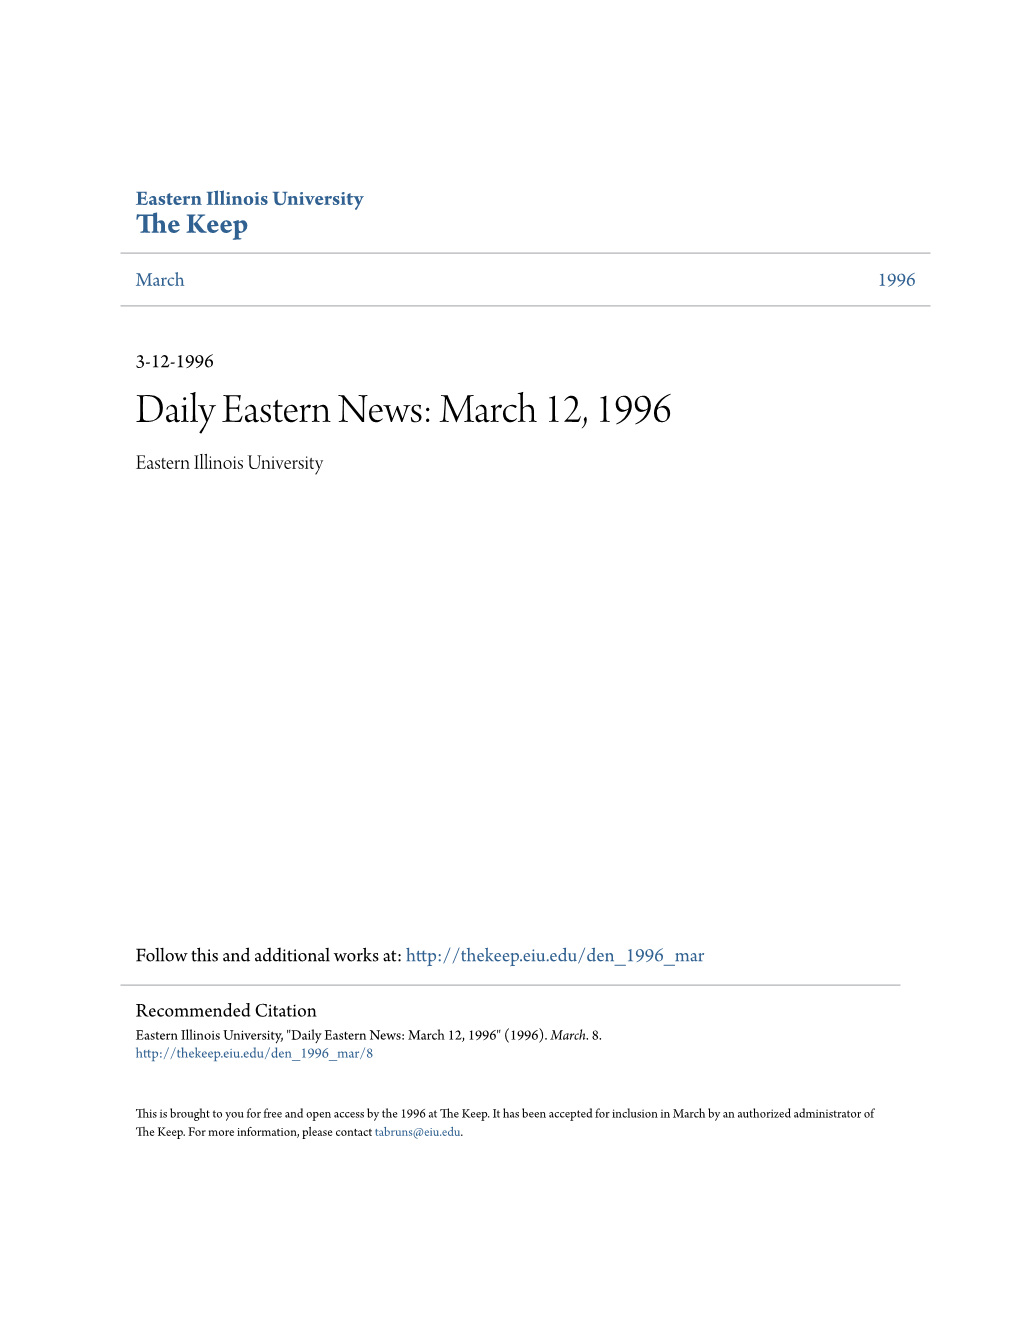 Daily Eastern News: March 12, 1996 Eastern Illinois University